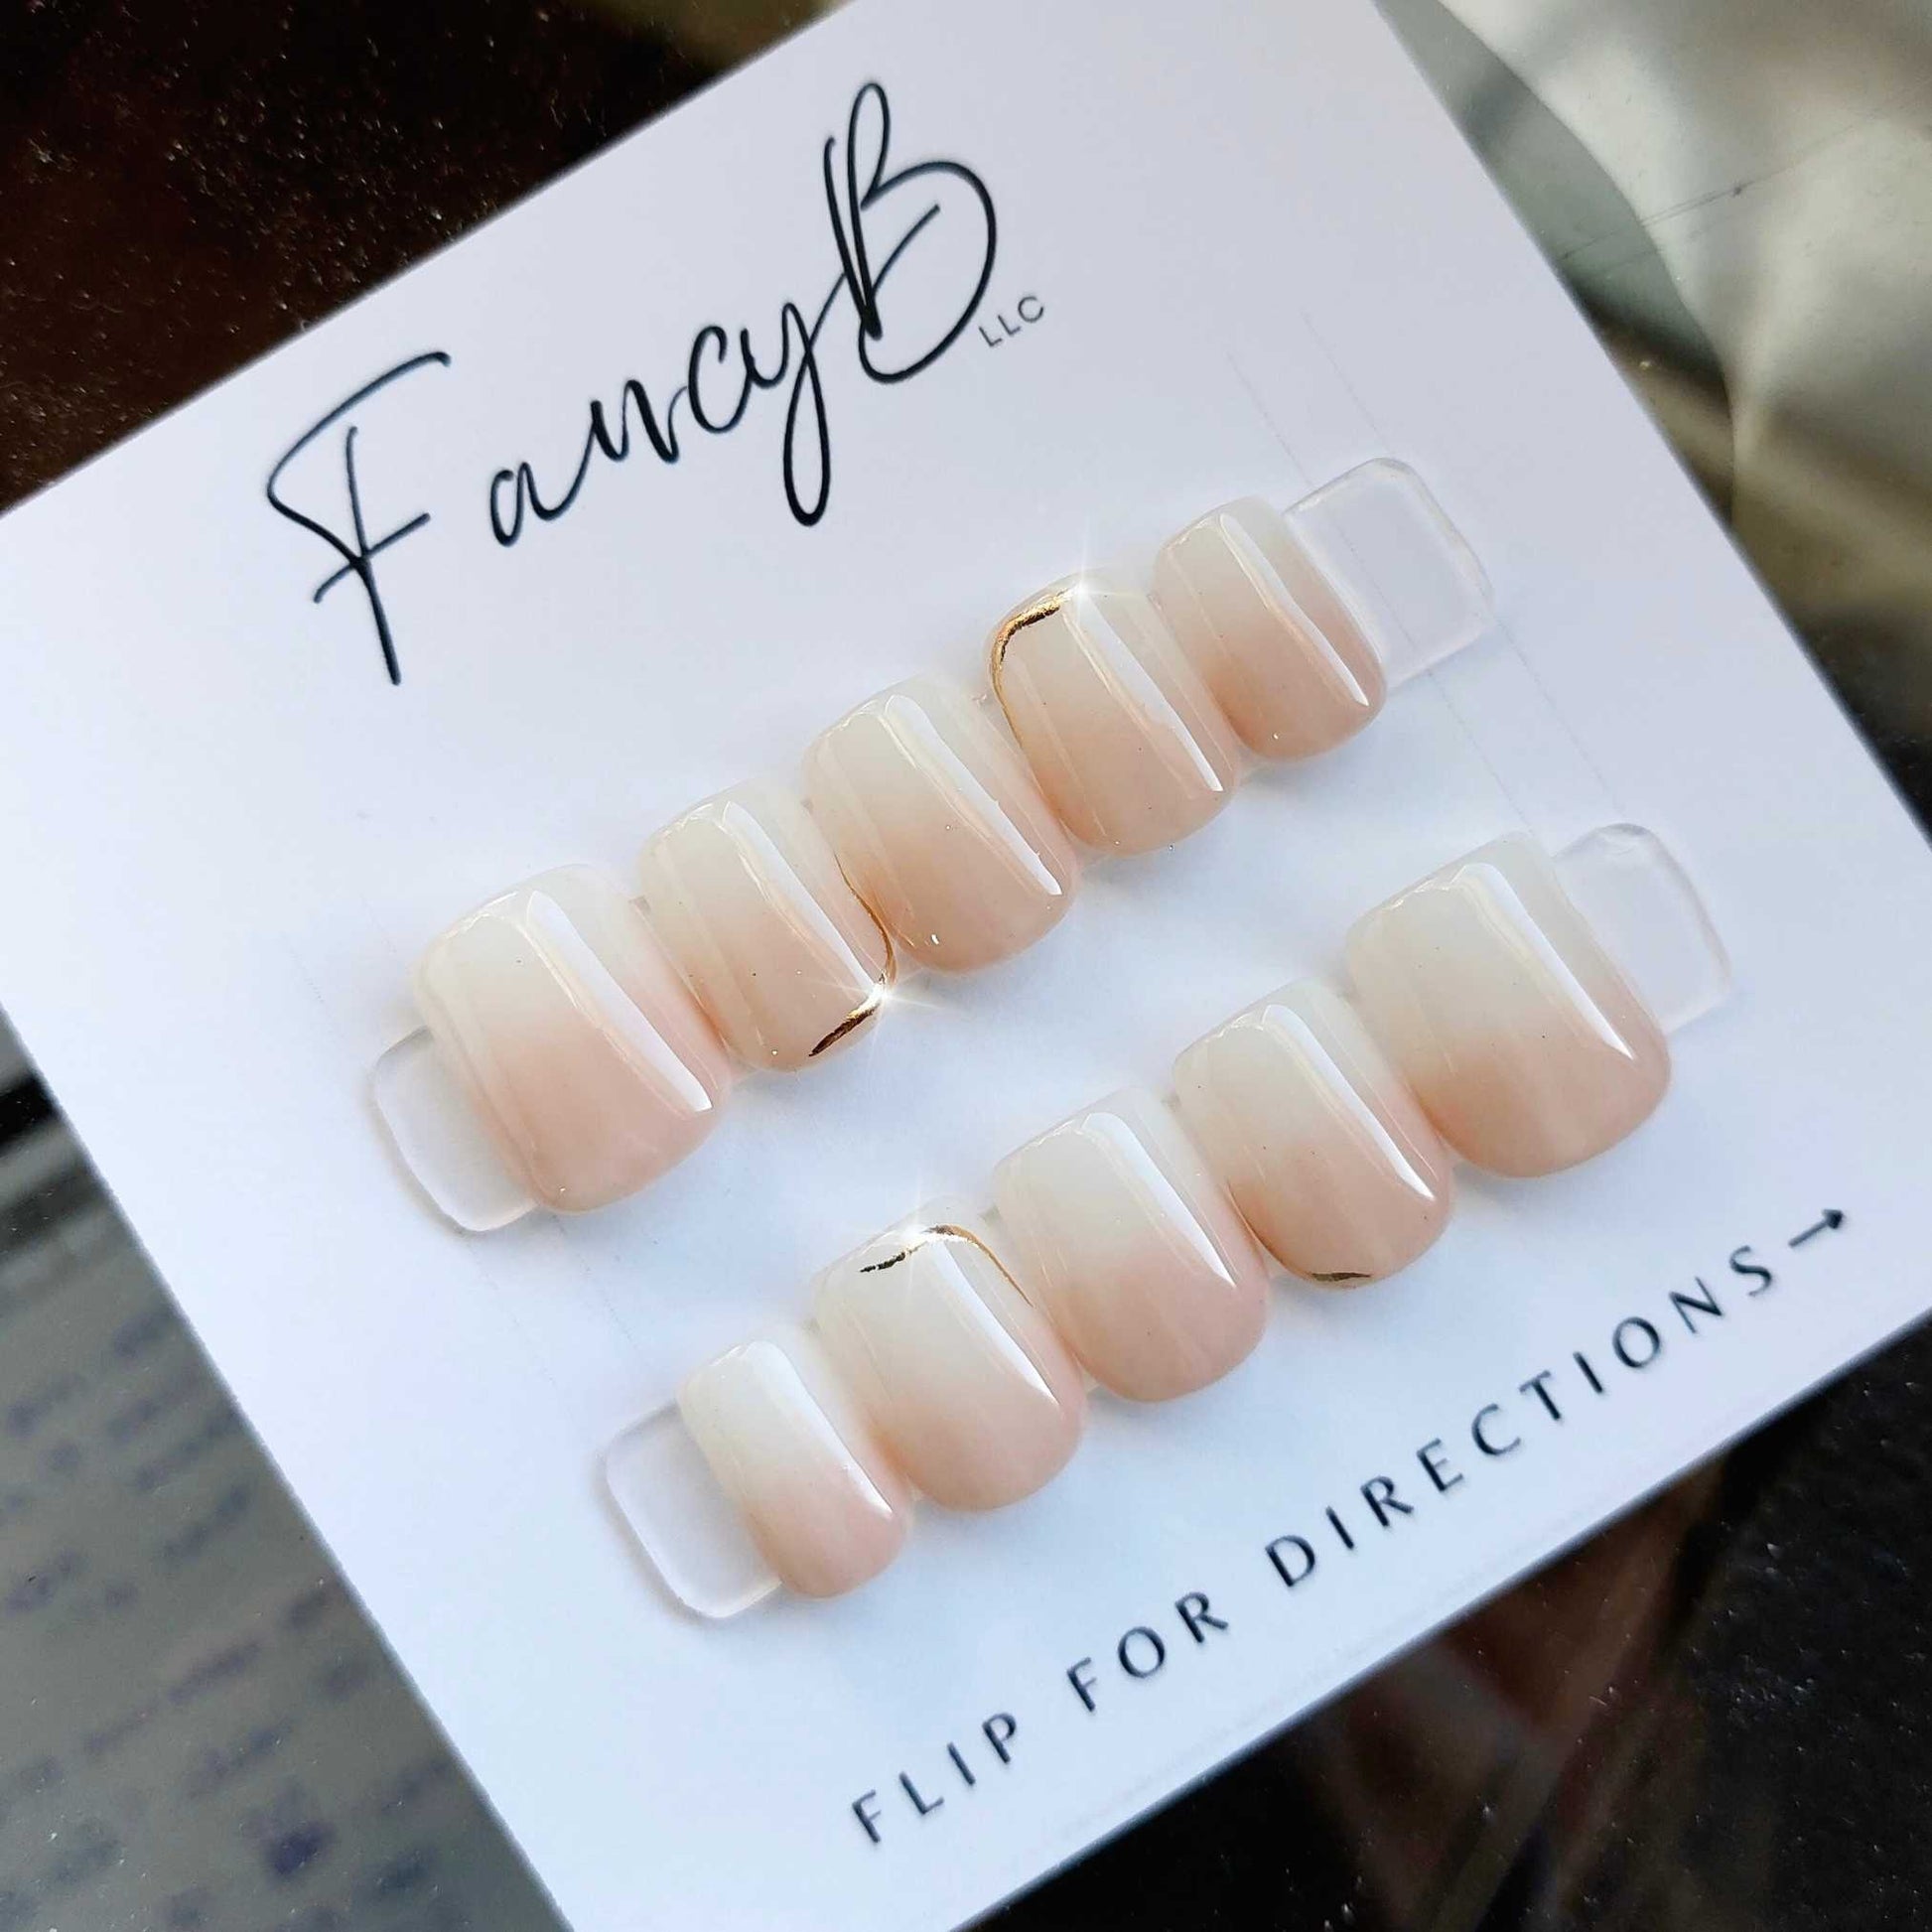 Jelly ombre nails, natural ombre false nails with gold accents fancyb handmade nails in extra short square